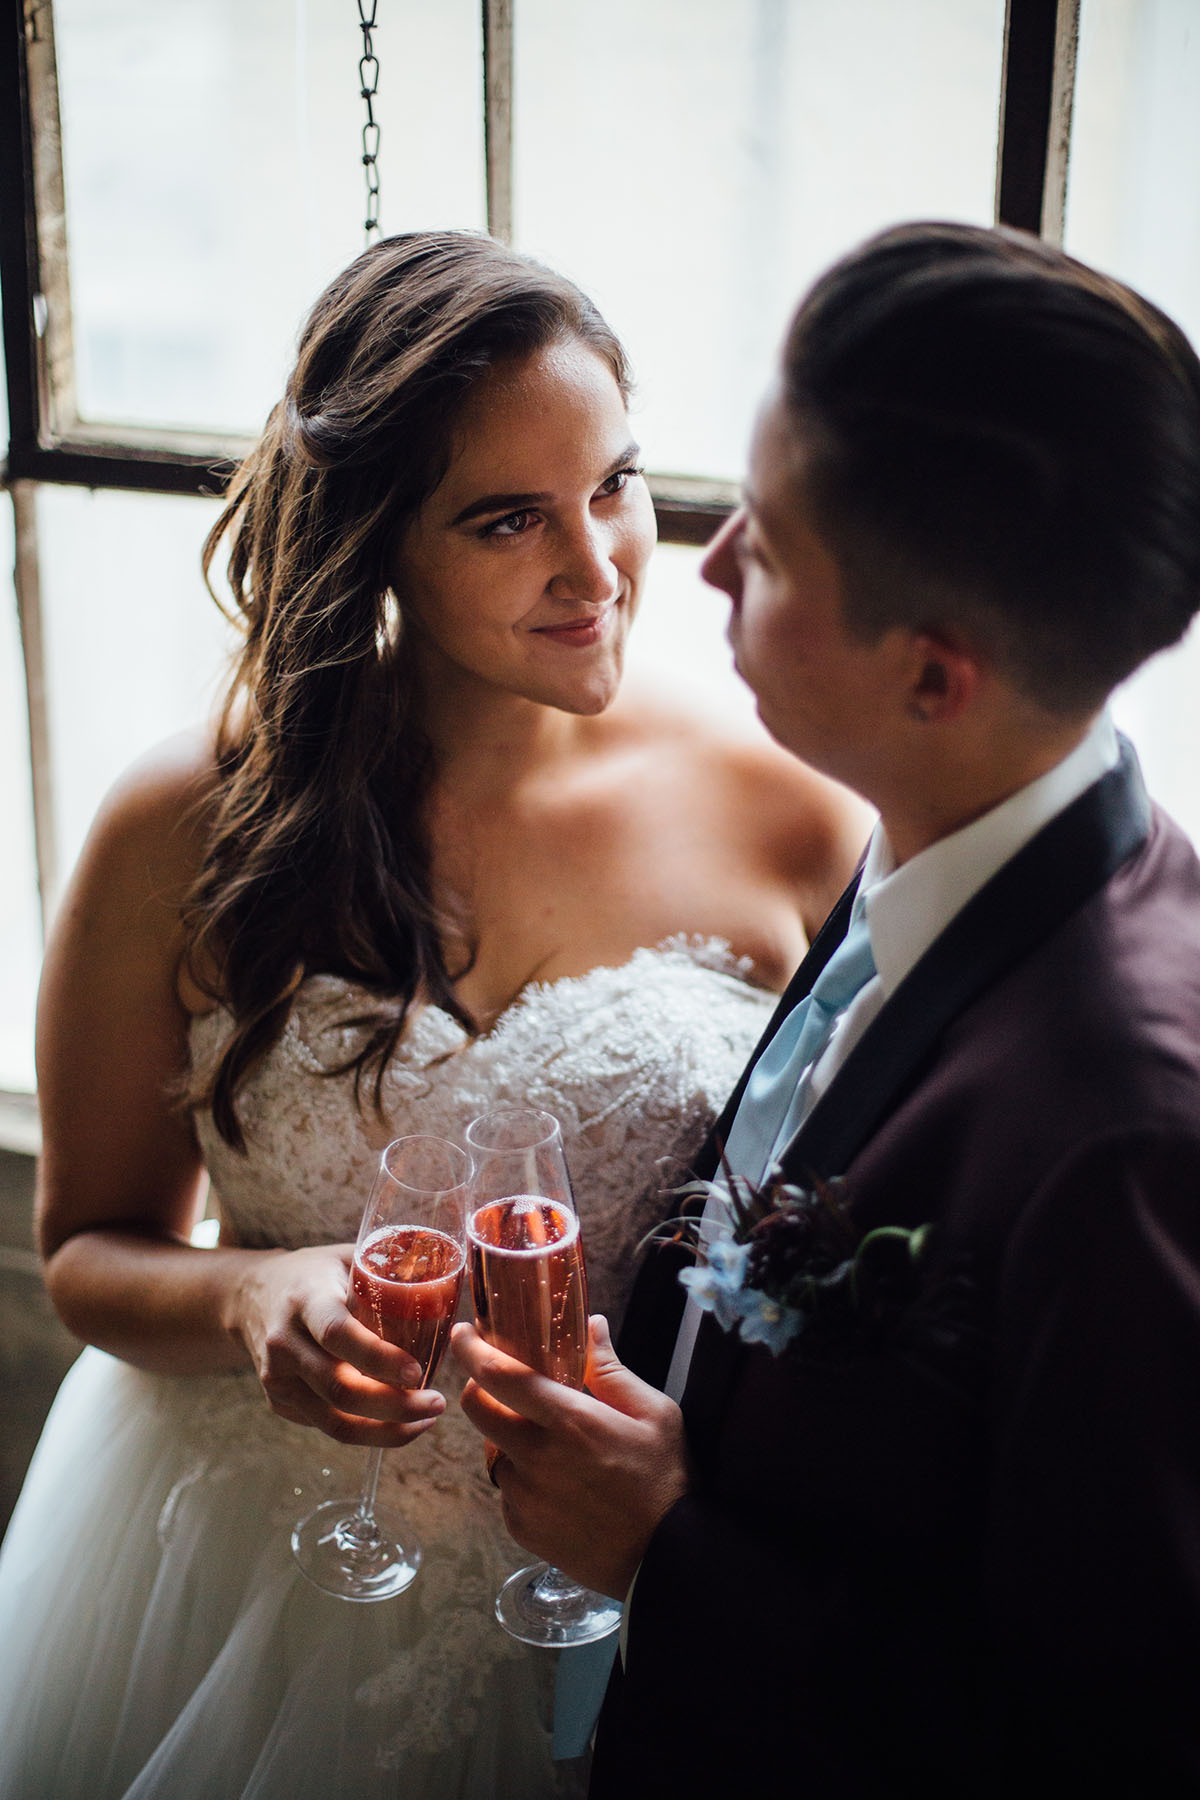 Pop-up styled lesbian wedding shoot in grays and blues champagne celebration